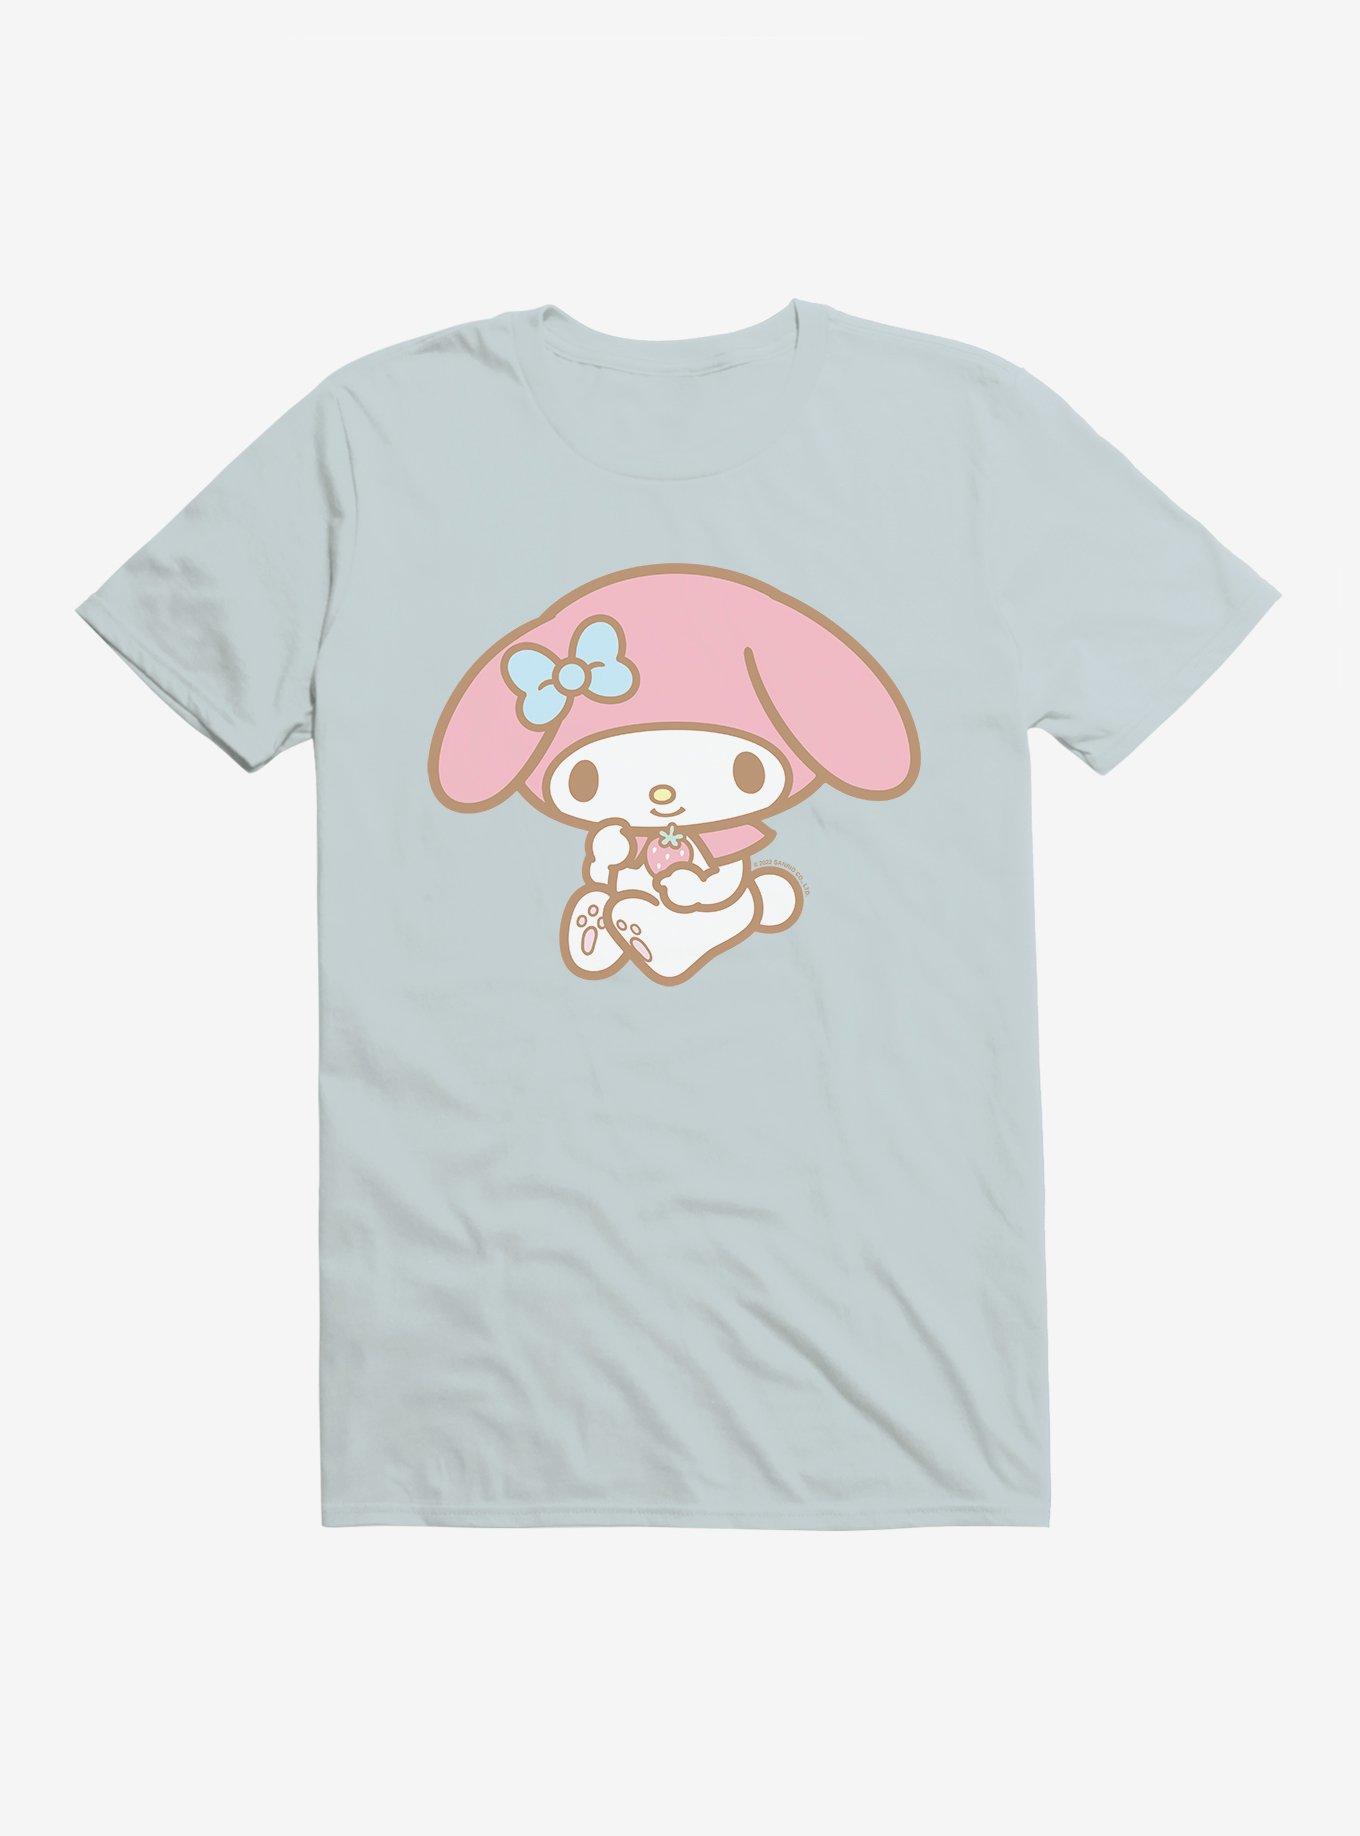 My Melody Holding Strawberry T-Shirt, LIGHT BLUE, hi-res